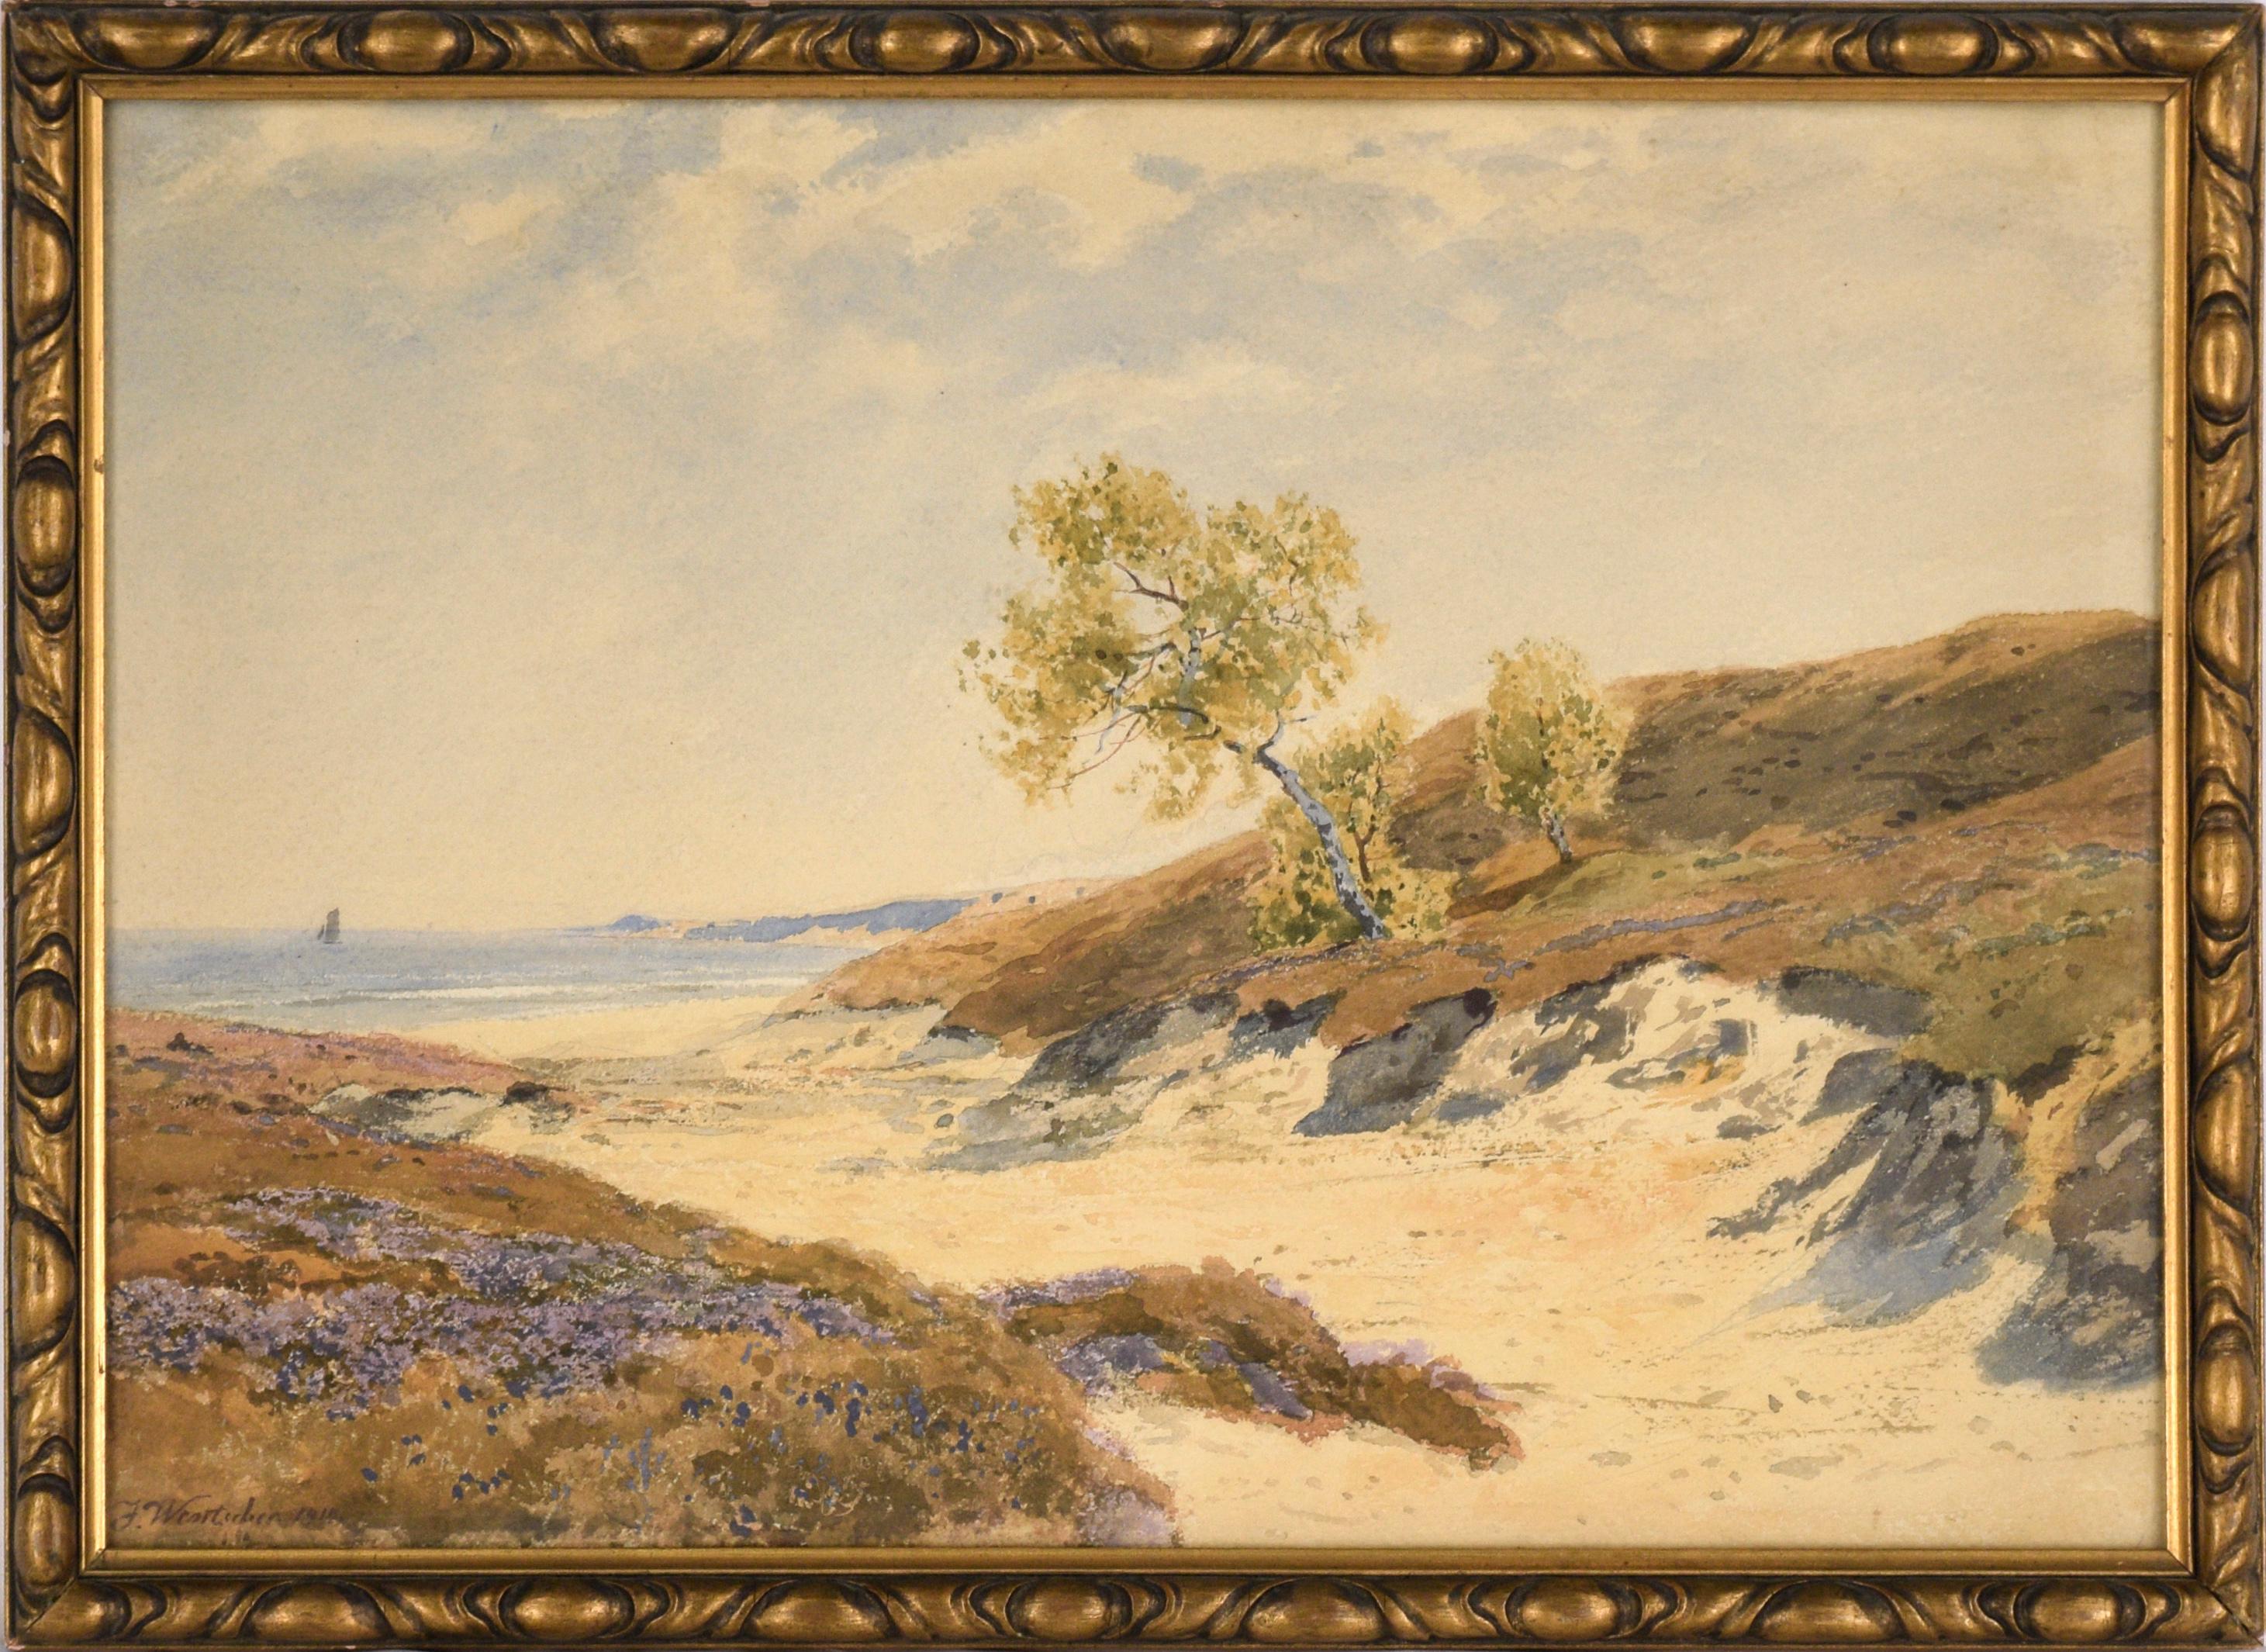 Unknown Landscape Art - Lone Tree at the Shore, Early 20th Century Landscape Julius Theophil Wentscher